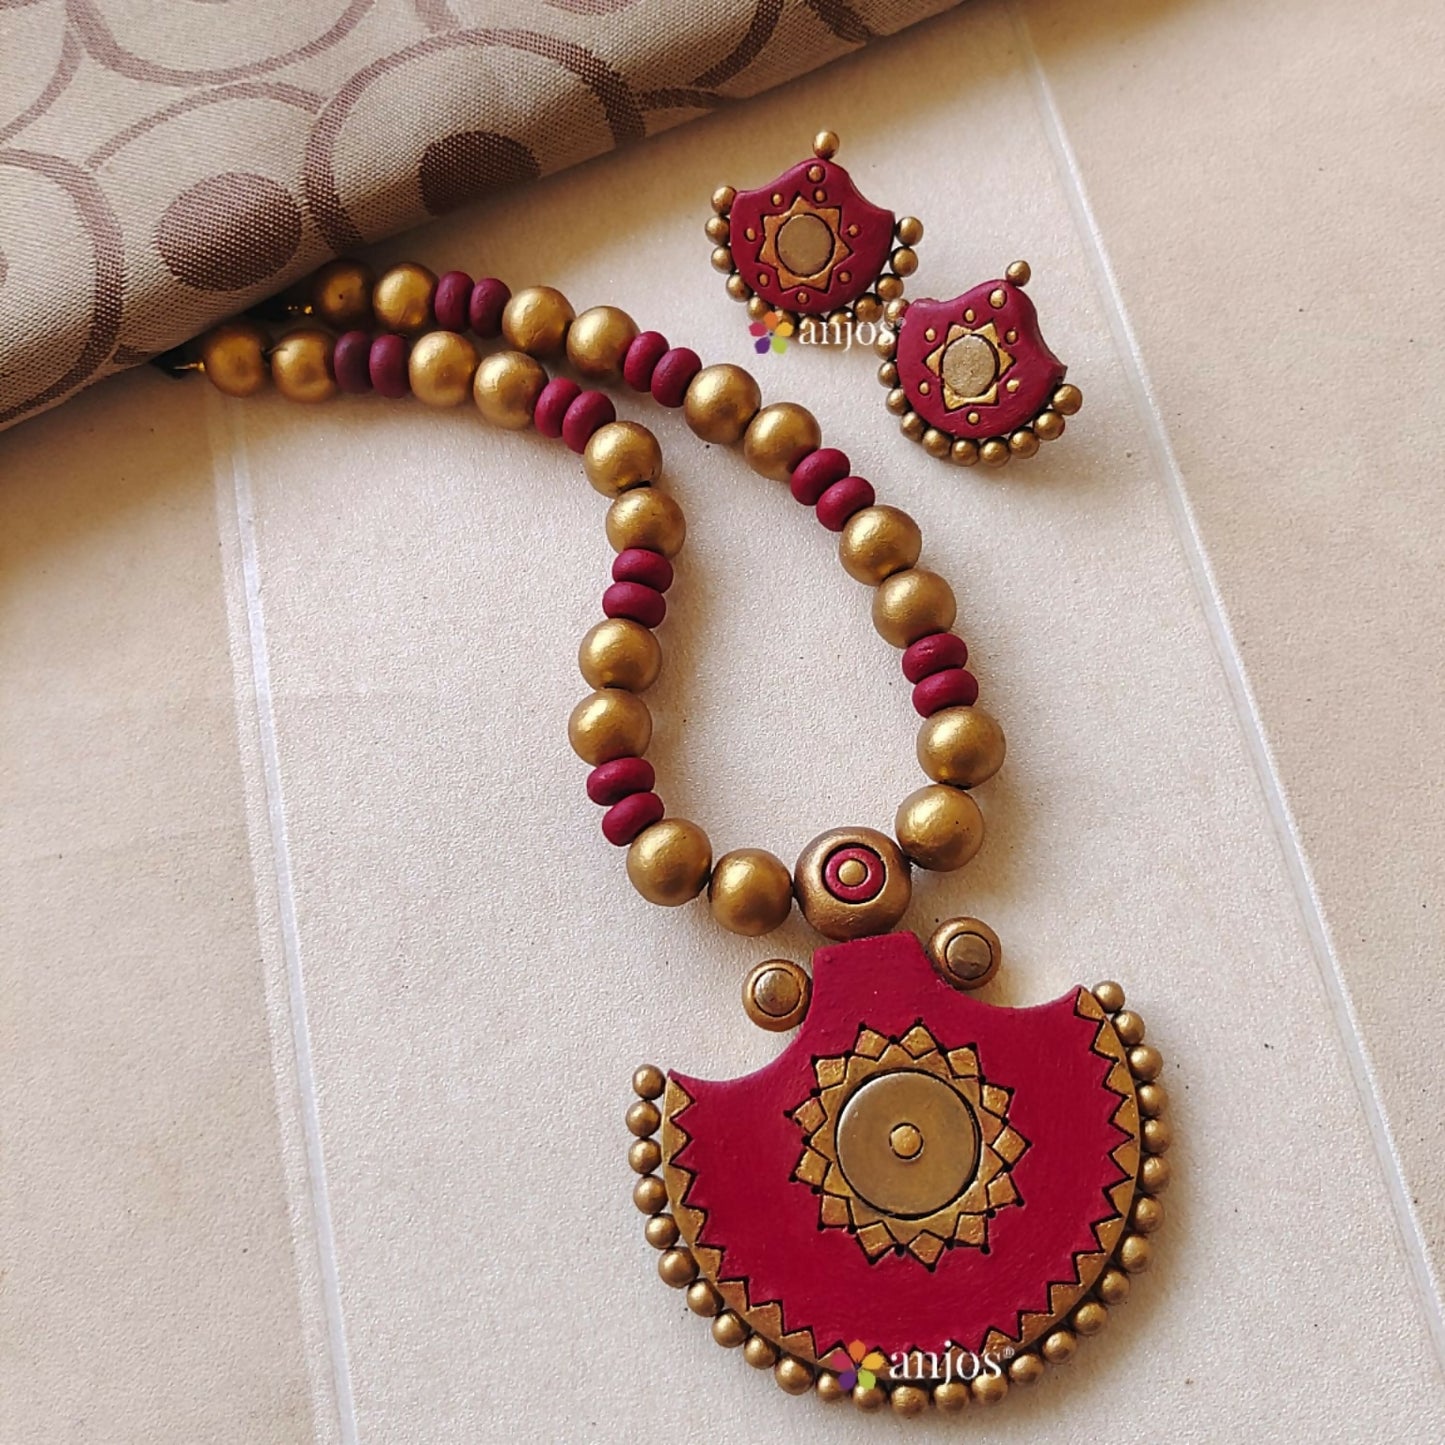 Artistic Red and Golden Terracotta Jewellery Set